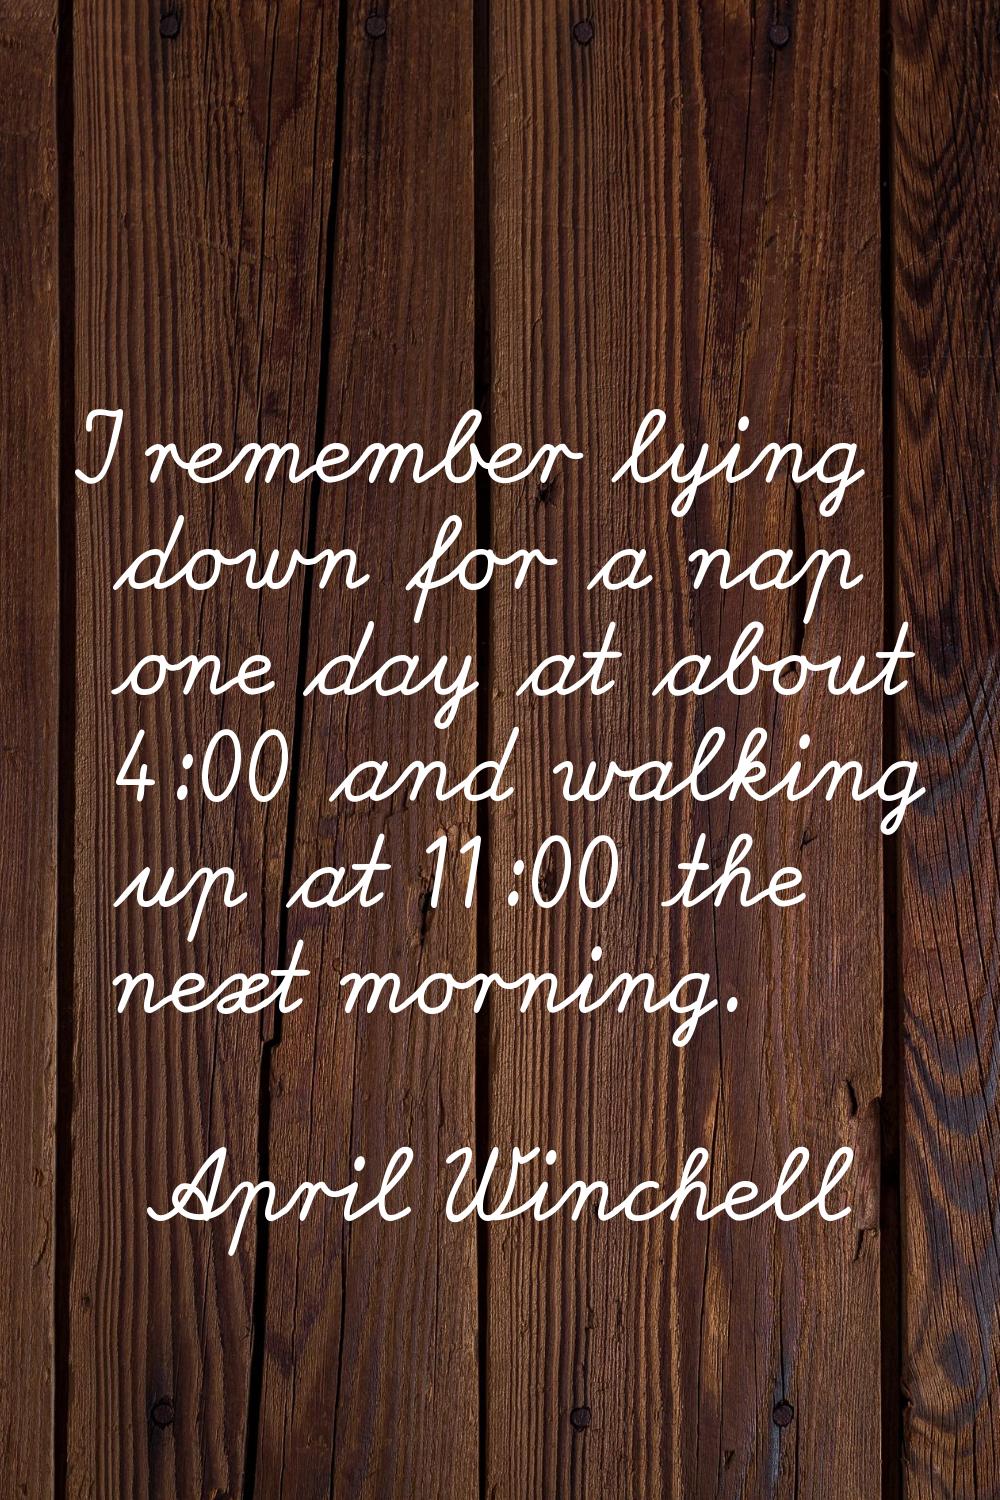 I remember lying down for a nap one day at about 4:00 and walking up at 11:00 the next morning.